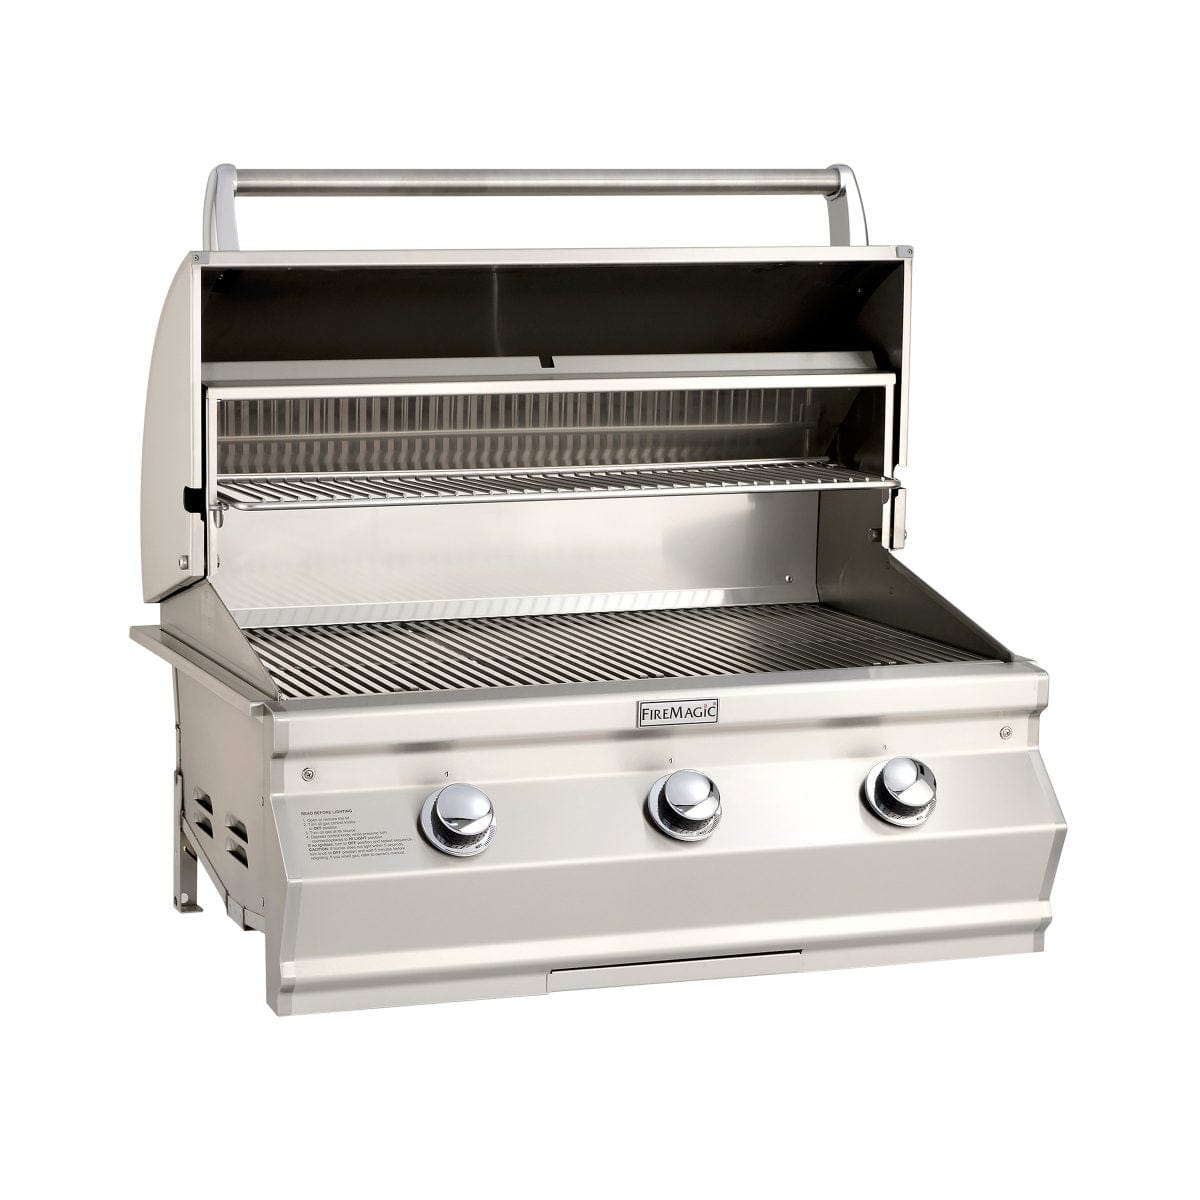 Fire Magic Choice Multi User CM540 Built In Grill - Kitchen King Direct